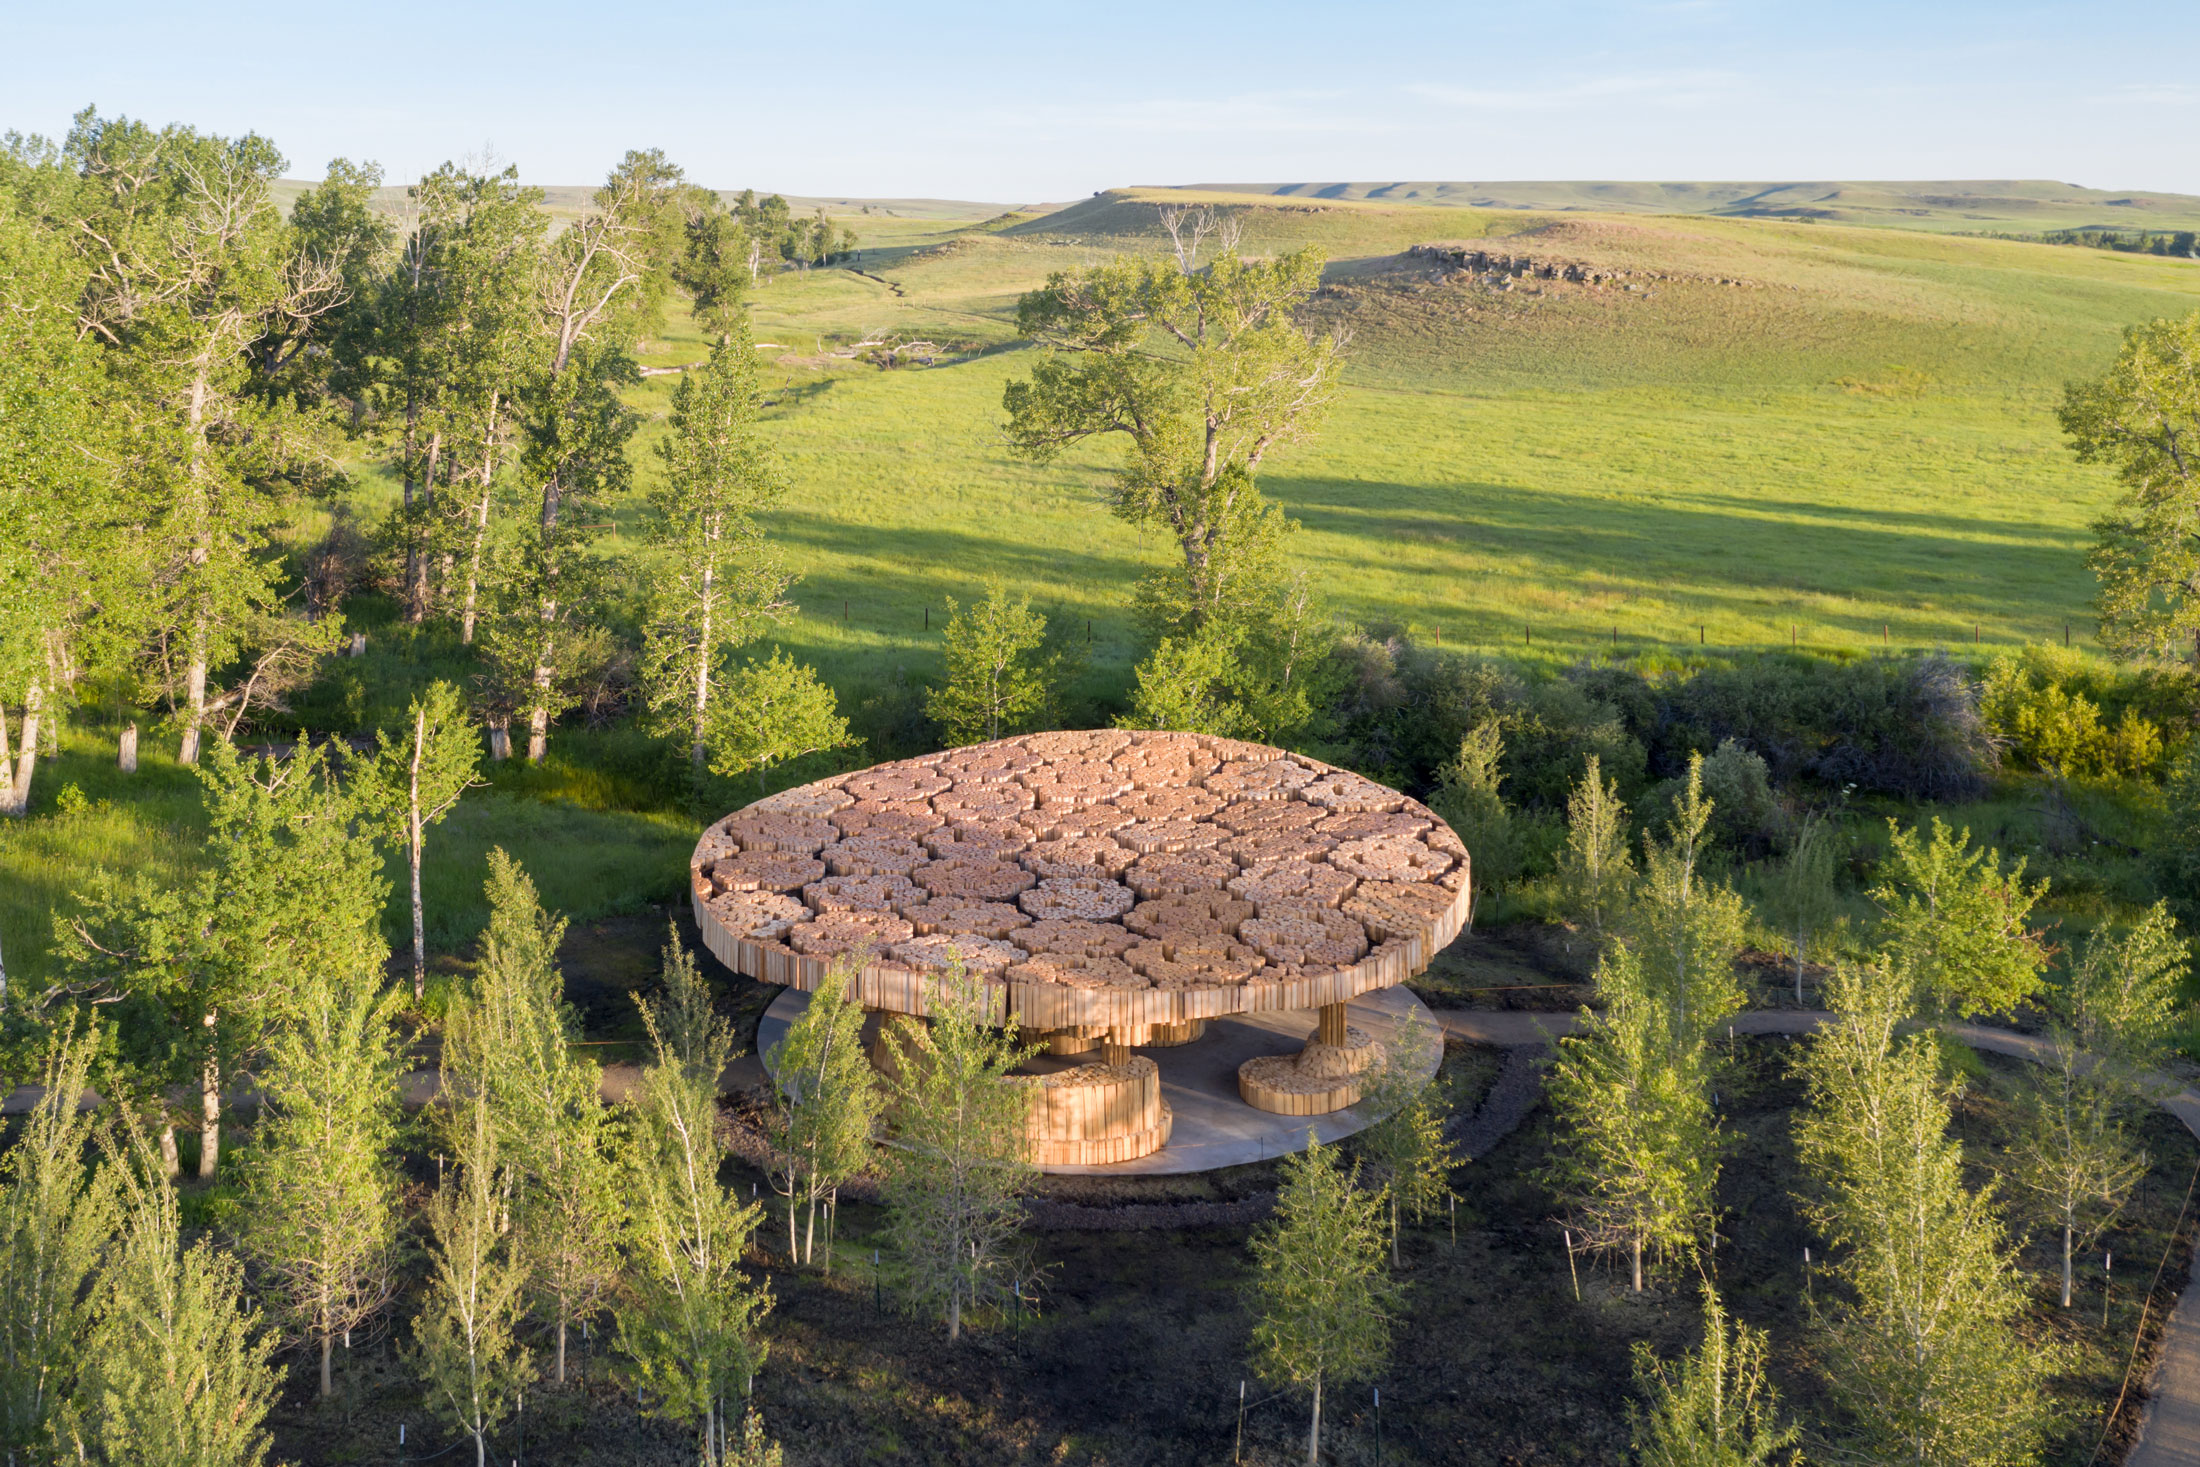 Francis Kéré-designed Xylem at Tippet Rise Art Center in Montana, 2019. Image courtesy of Tippet Rise/Iwan Baan. Photo by Iwan Baan.